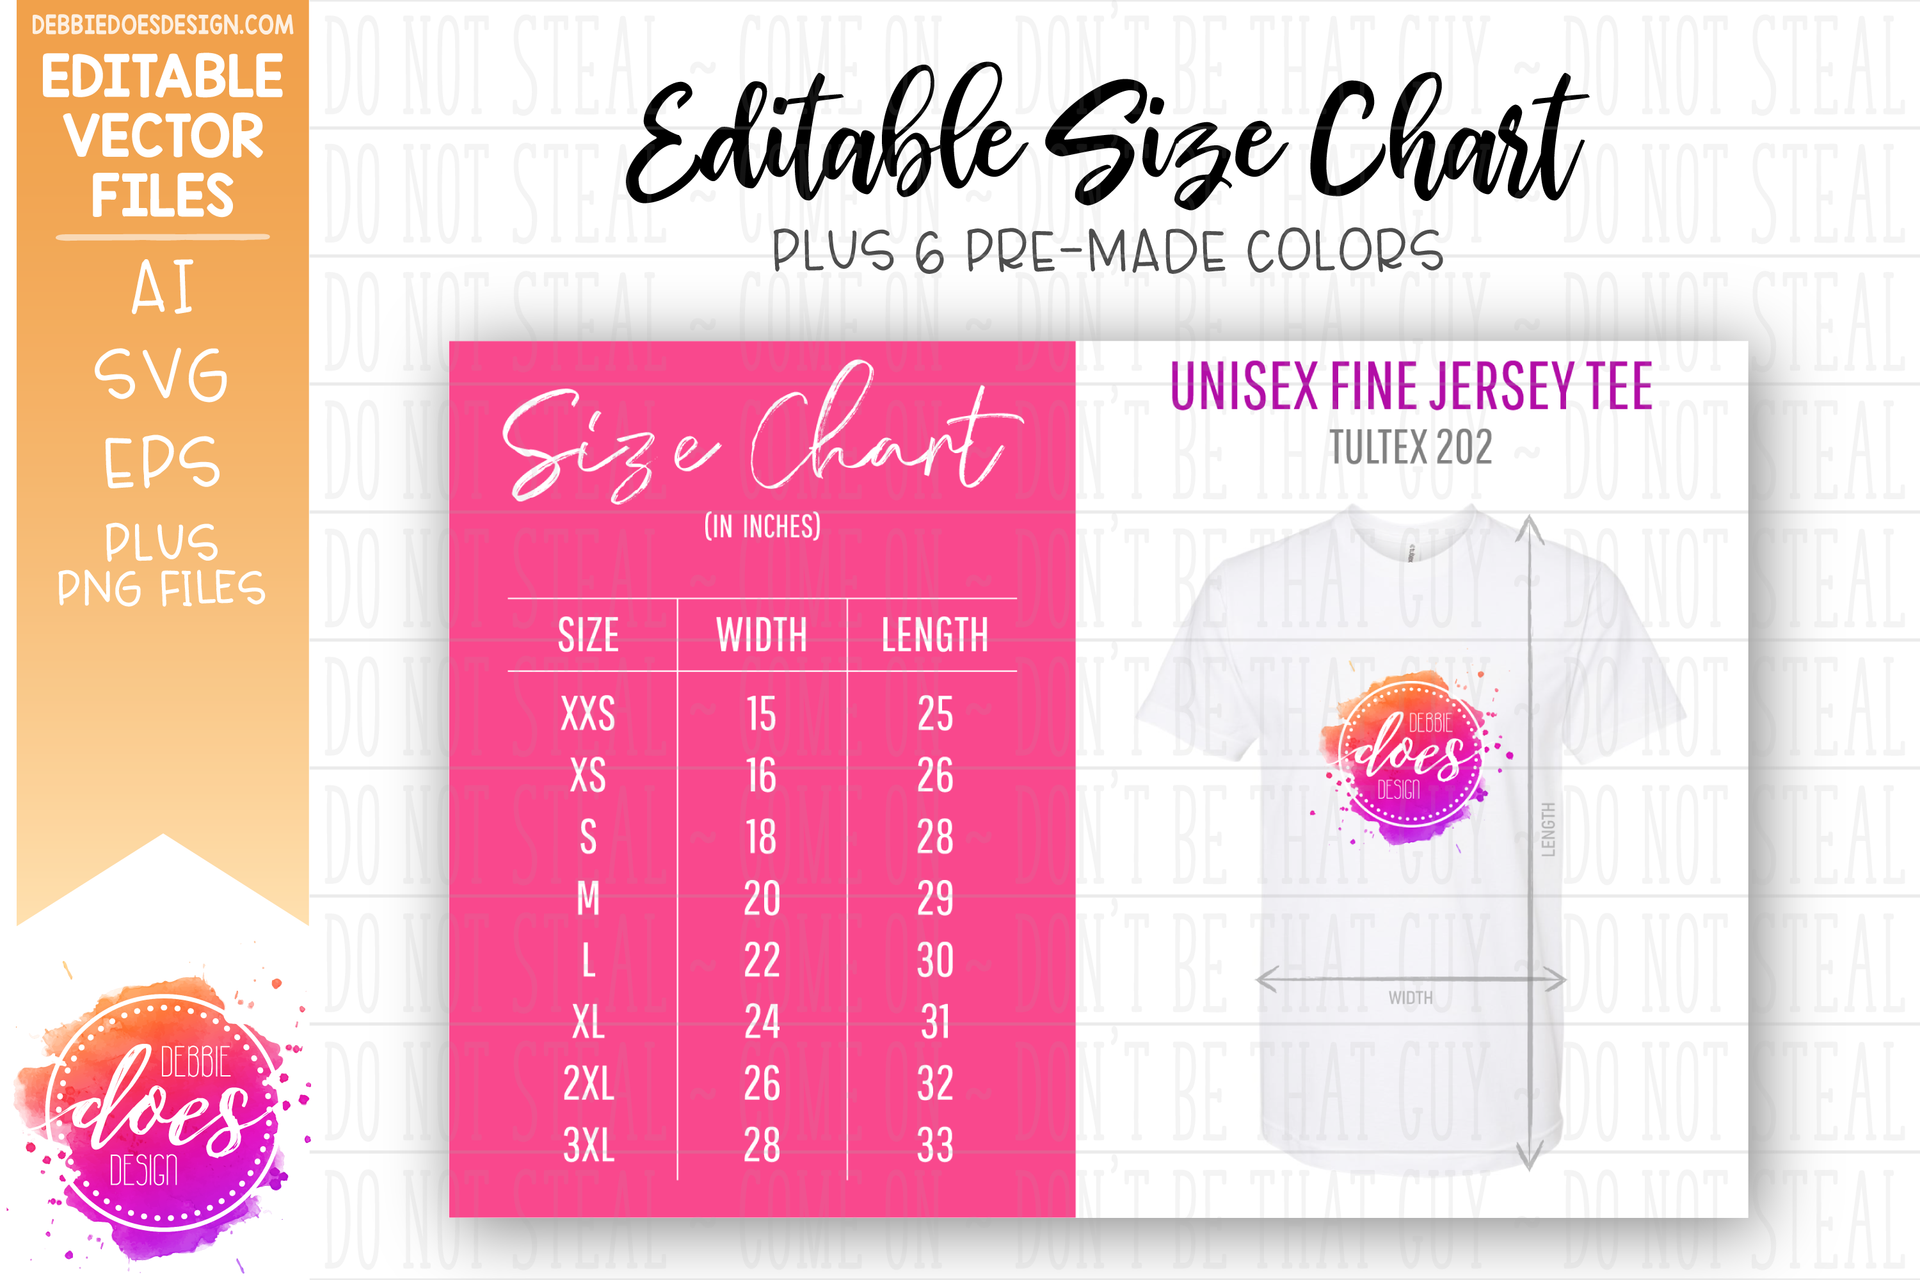 Tultex 202 - Editable Size Chart + 6 Colored PNG Files– Debbie Does Design